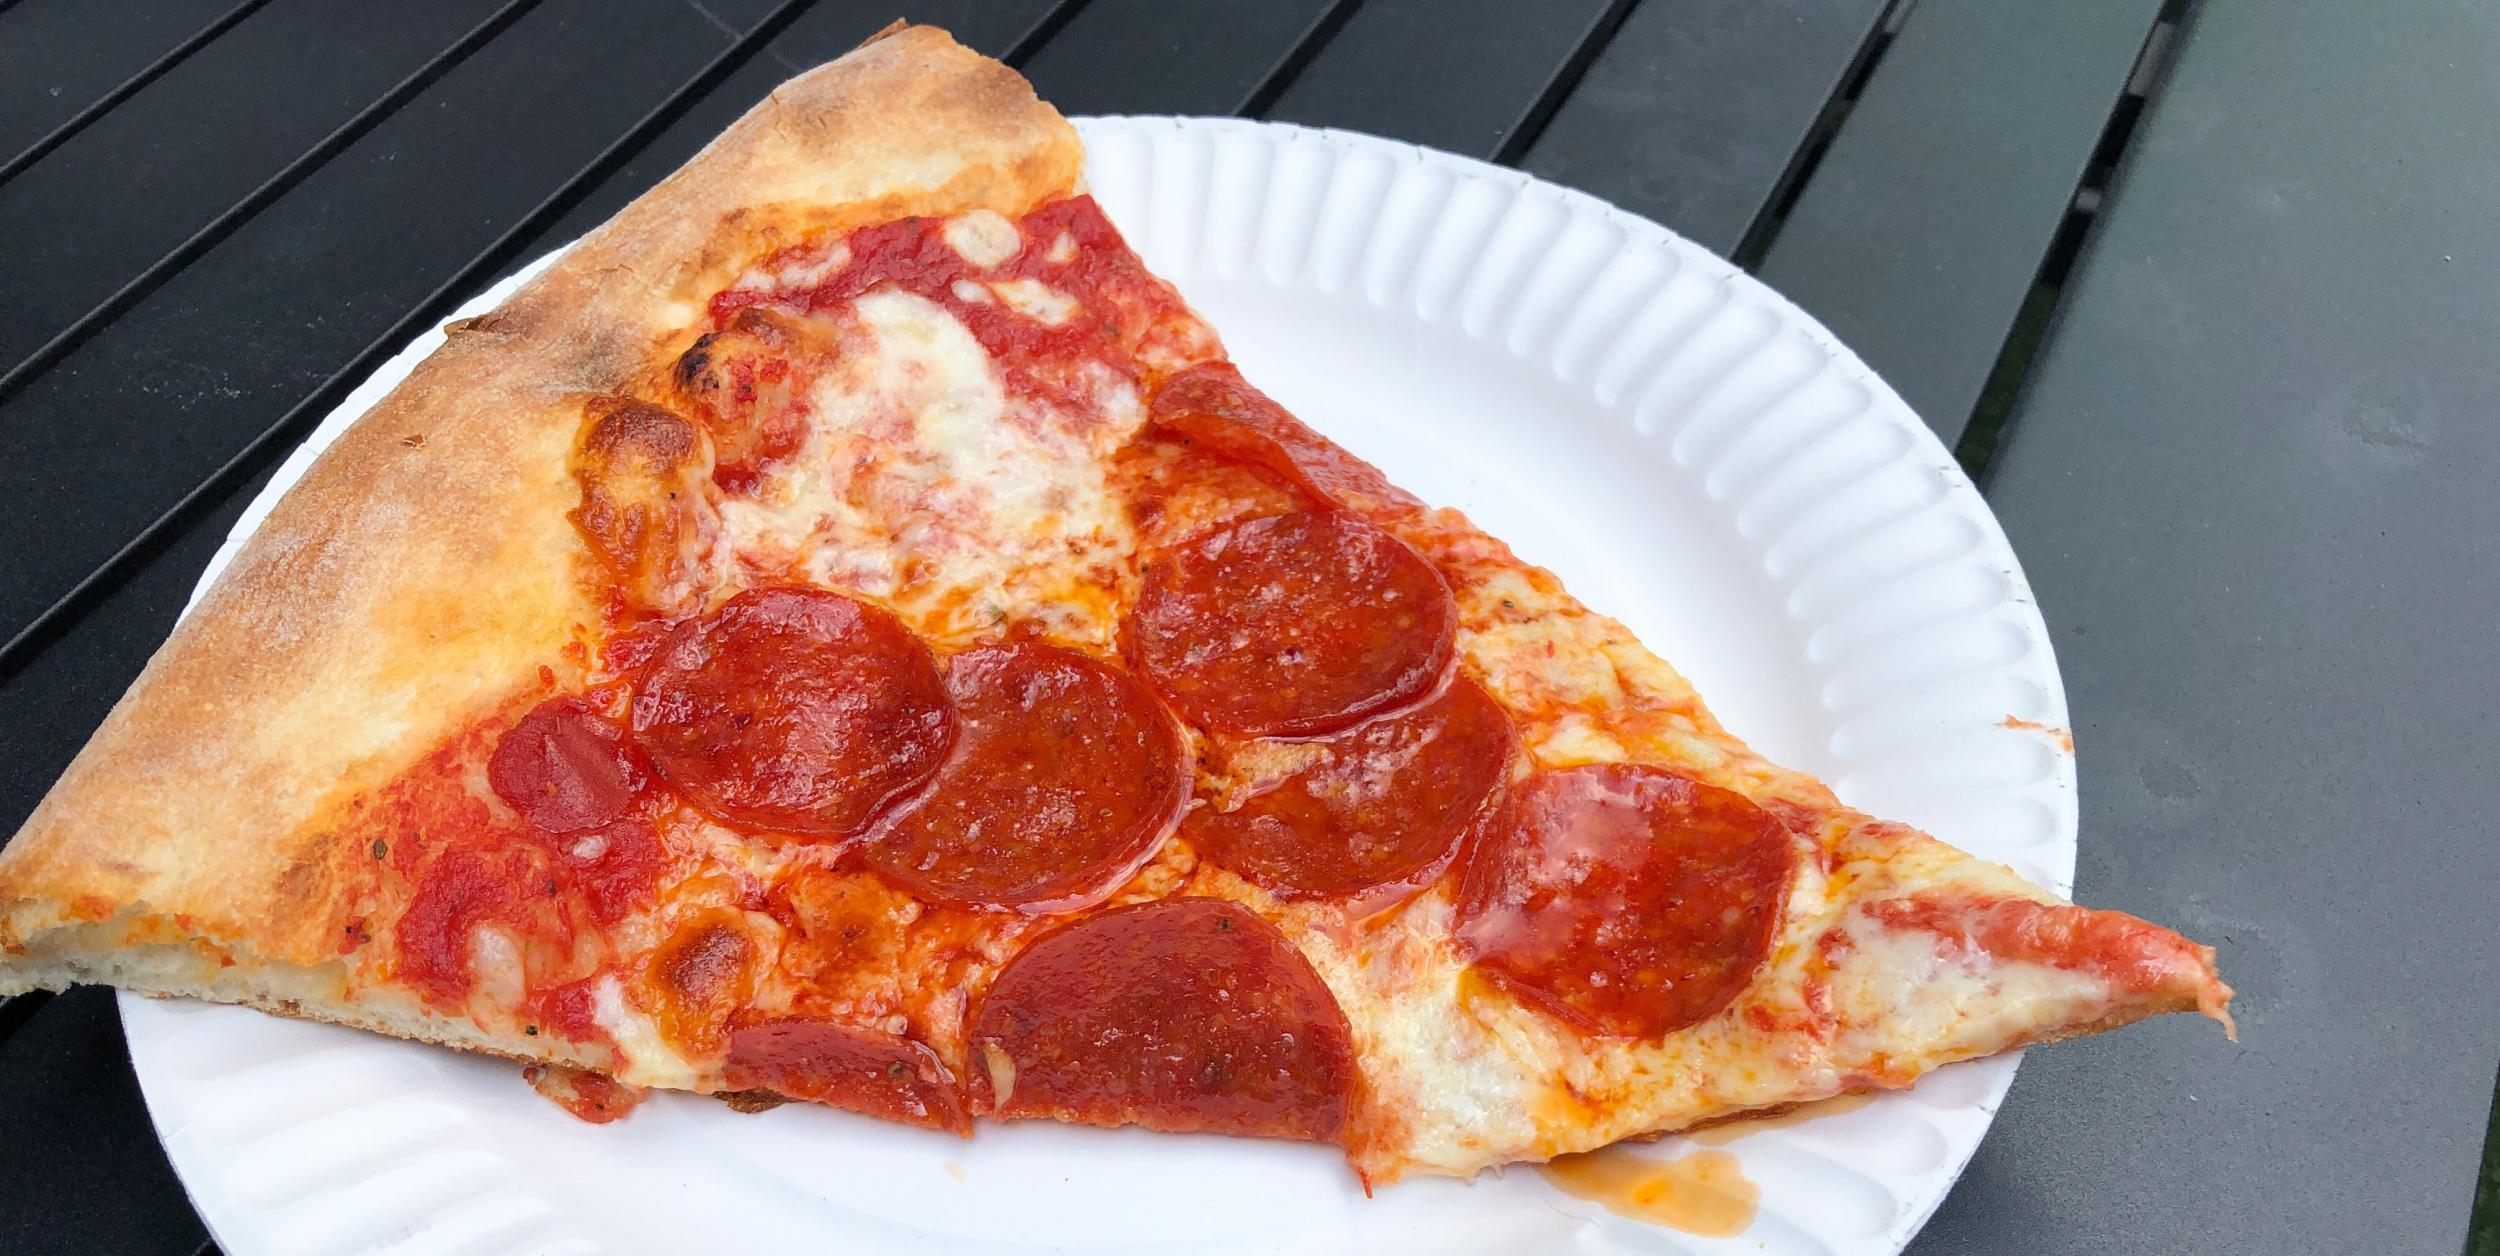 Pizza slice picture causes people to think twice about their school